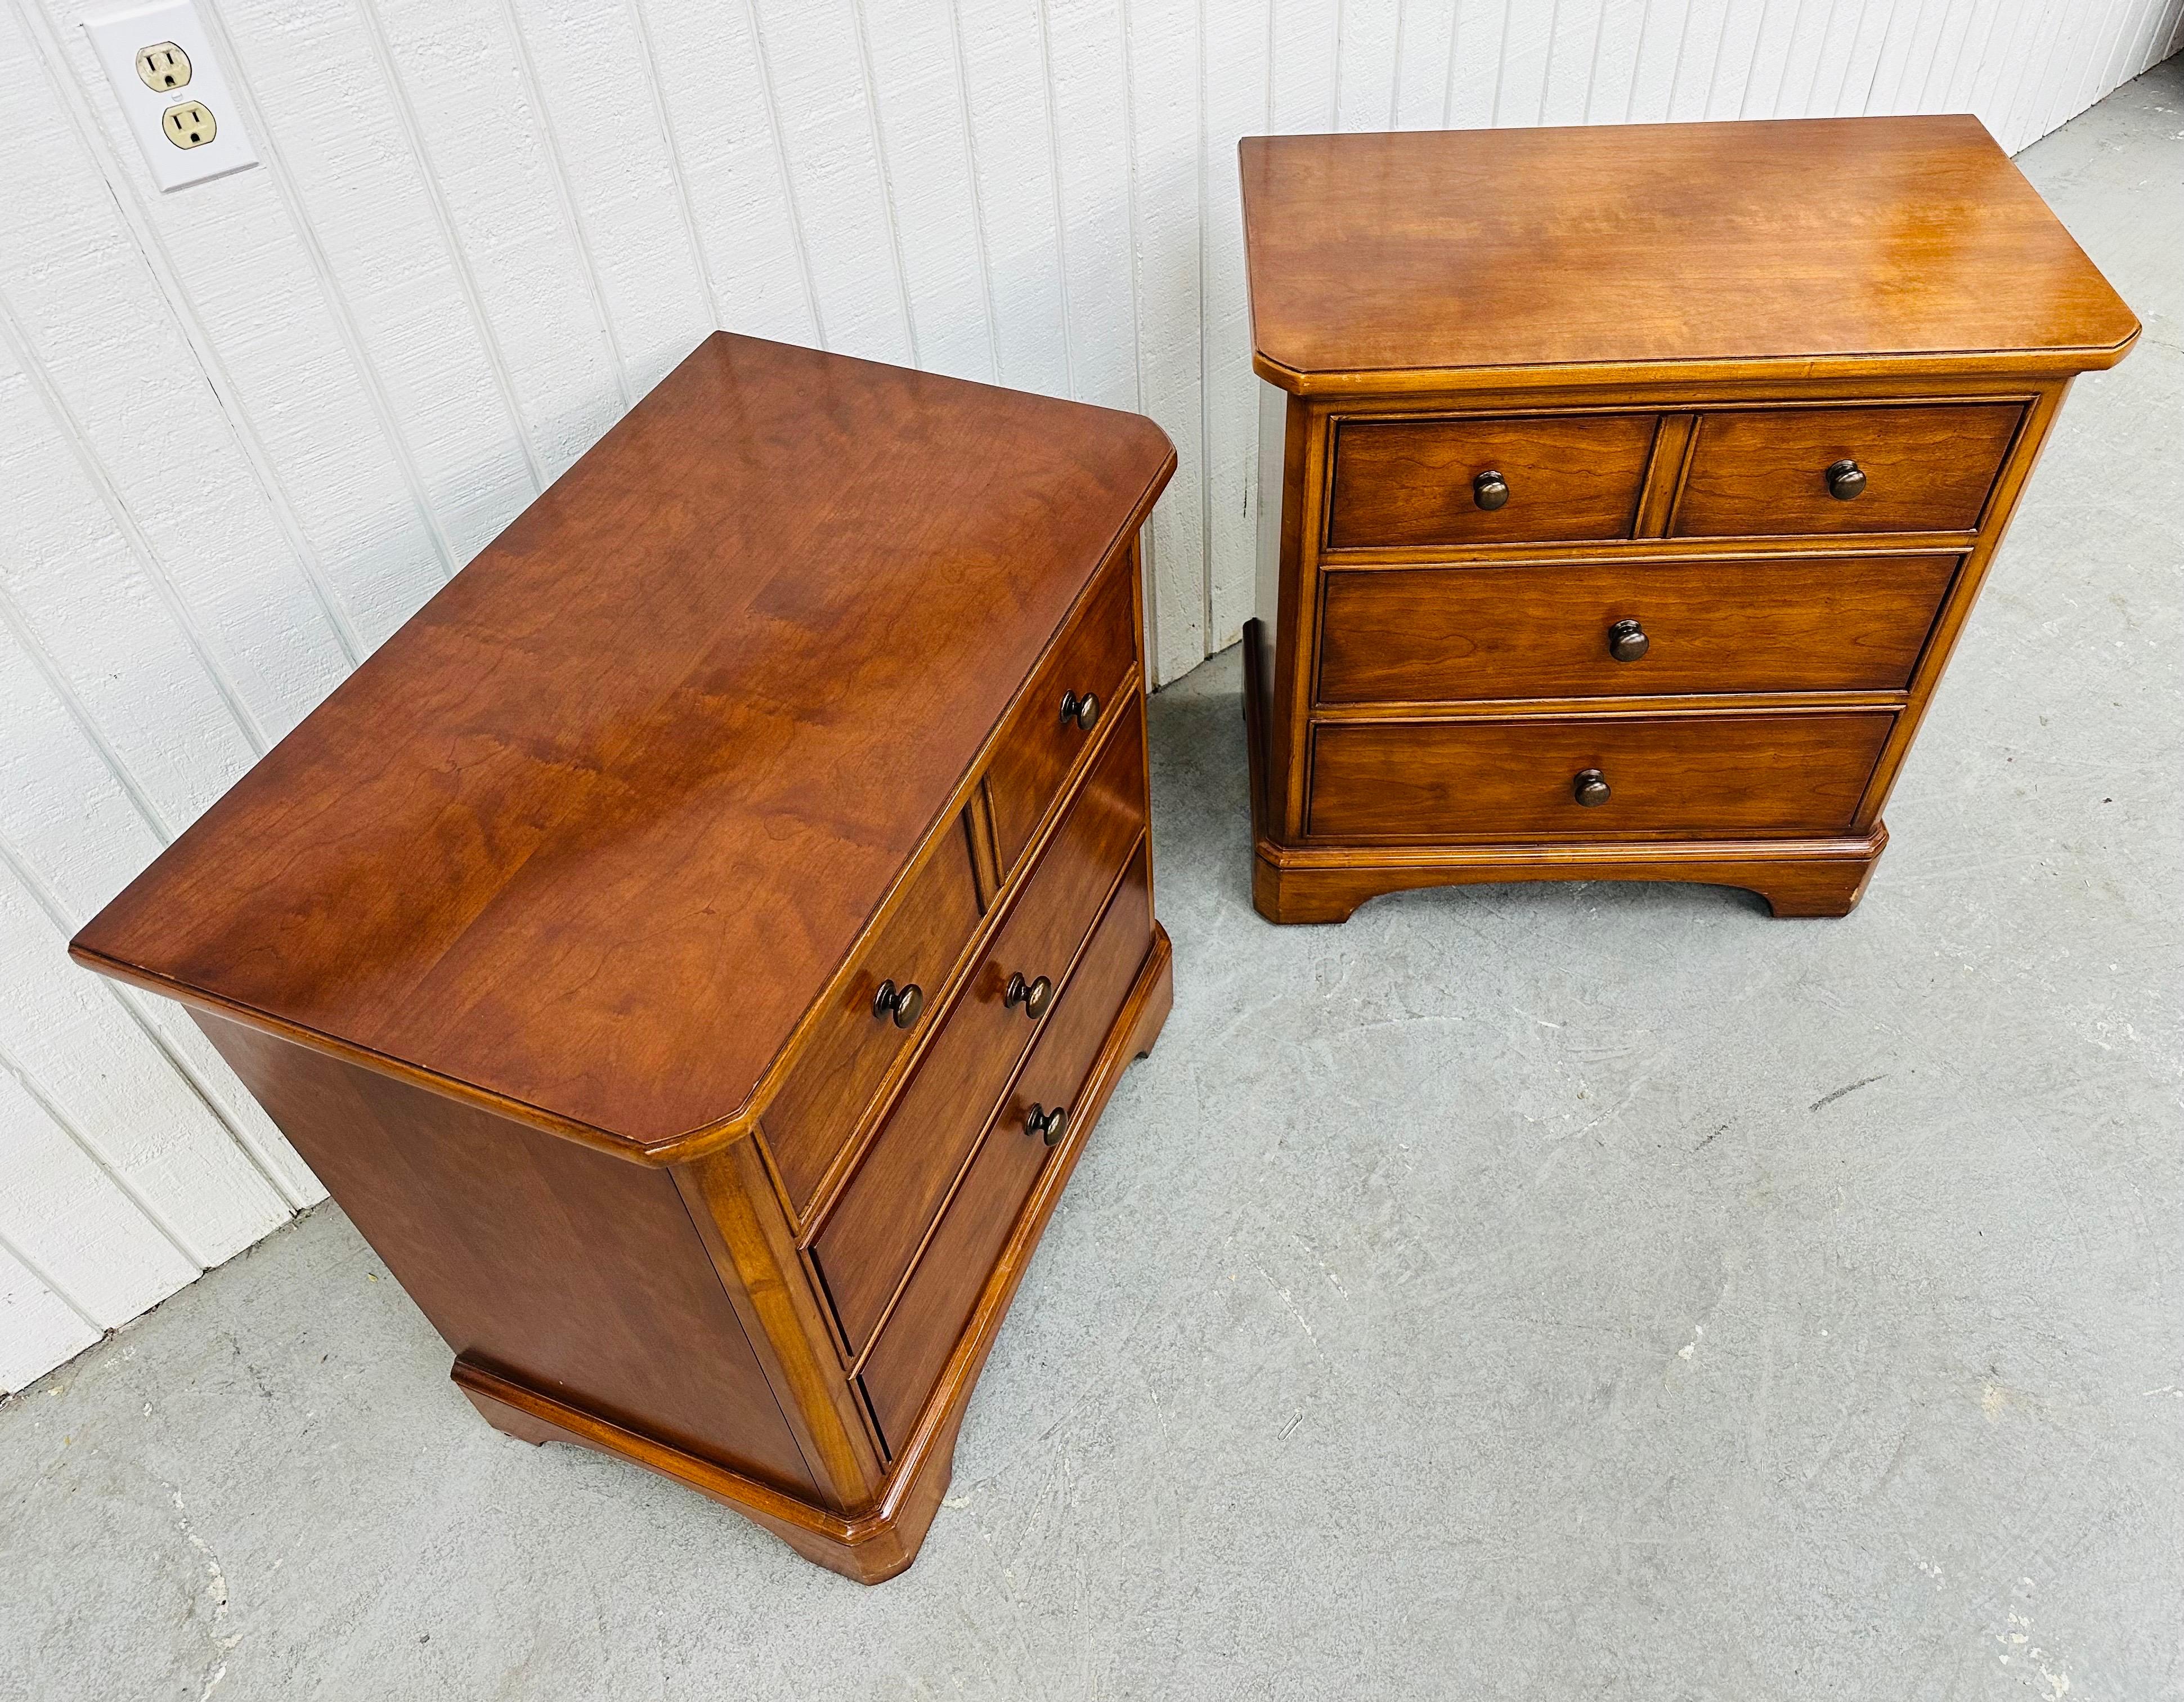 Vintage Thomasville Cherry Bachelor Chest Nightstands - Set of 2 In Good Condition For Sale In Clarksboro, NJ